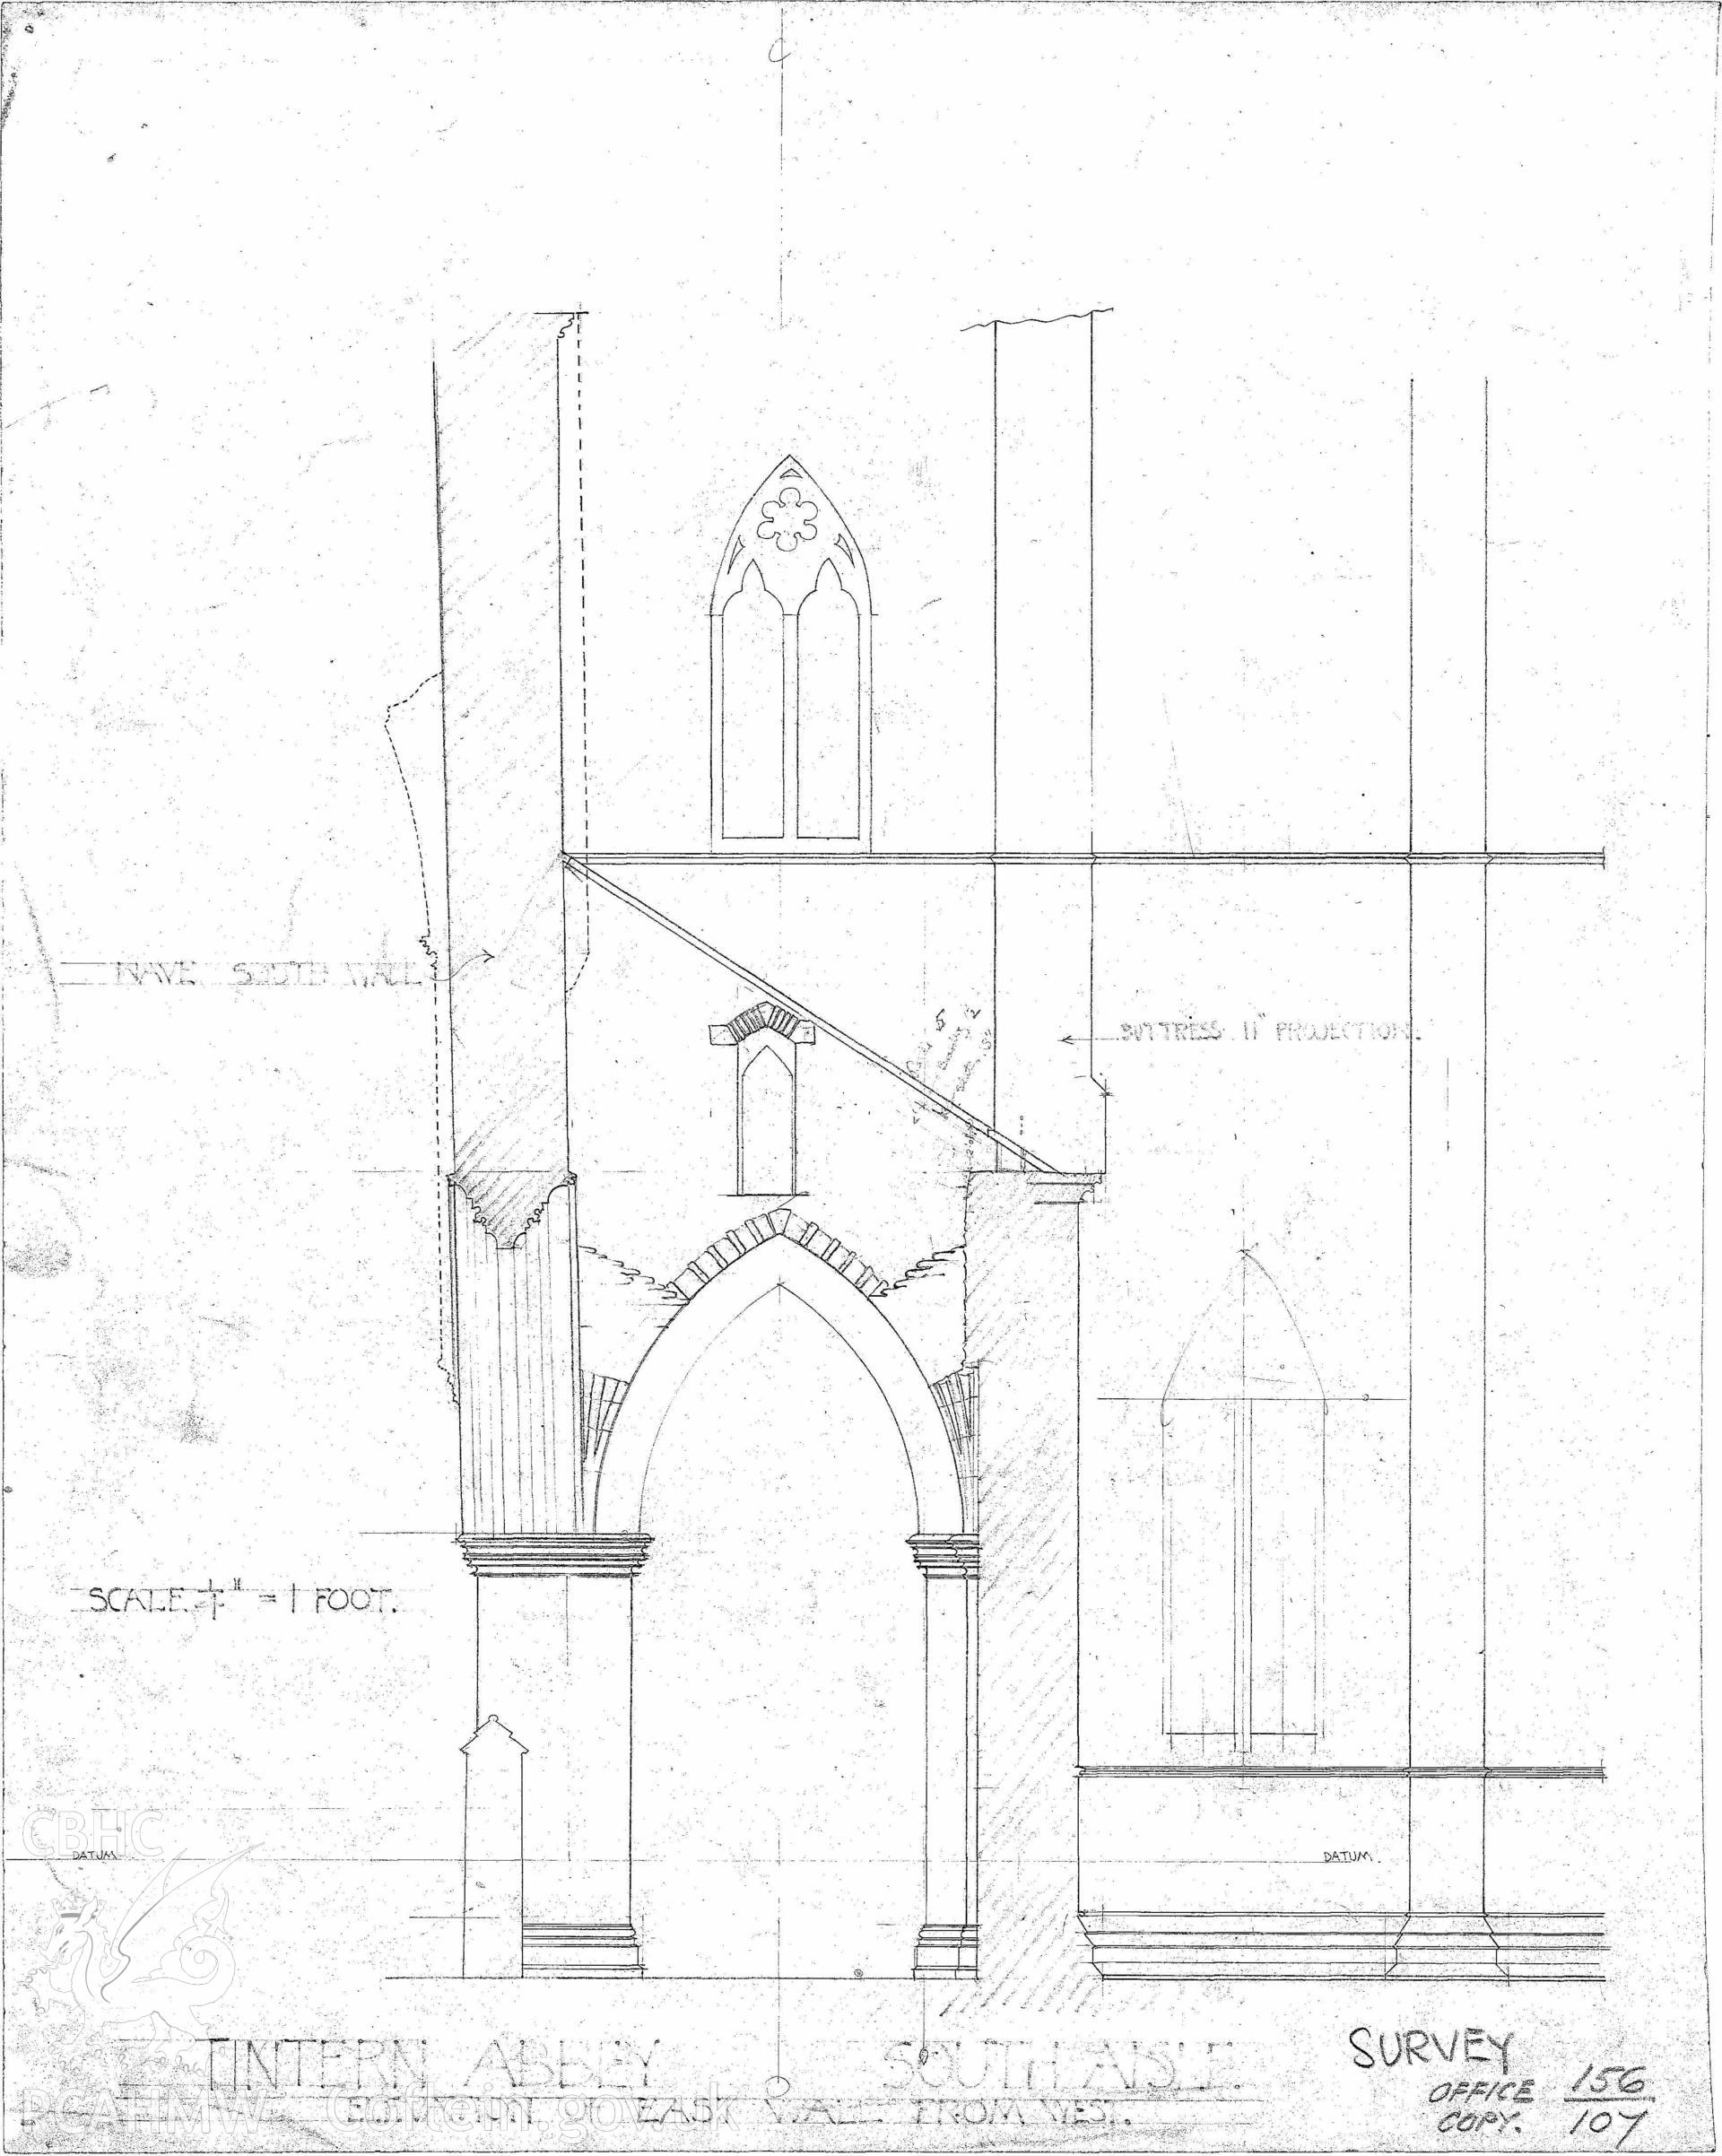 Cadw guardianship monument drawing of Tintern Abbey. South Aisle E Wall from West. Cadw ref. No. 156/107. Scale 1:48.